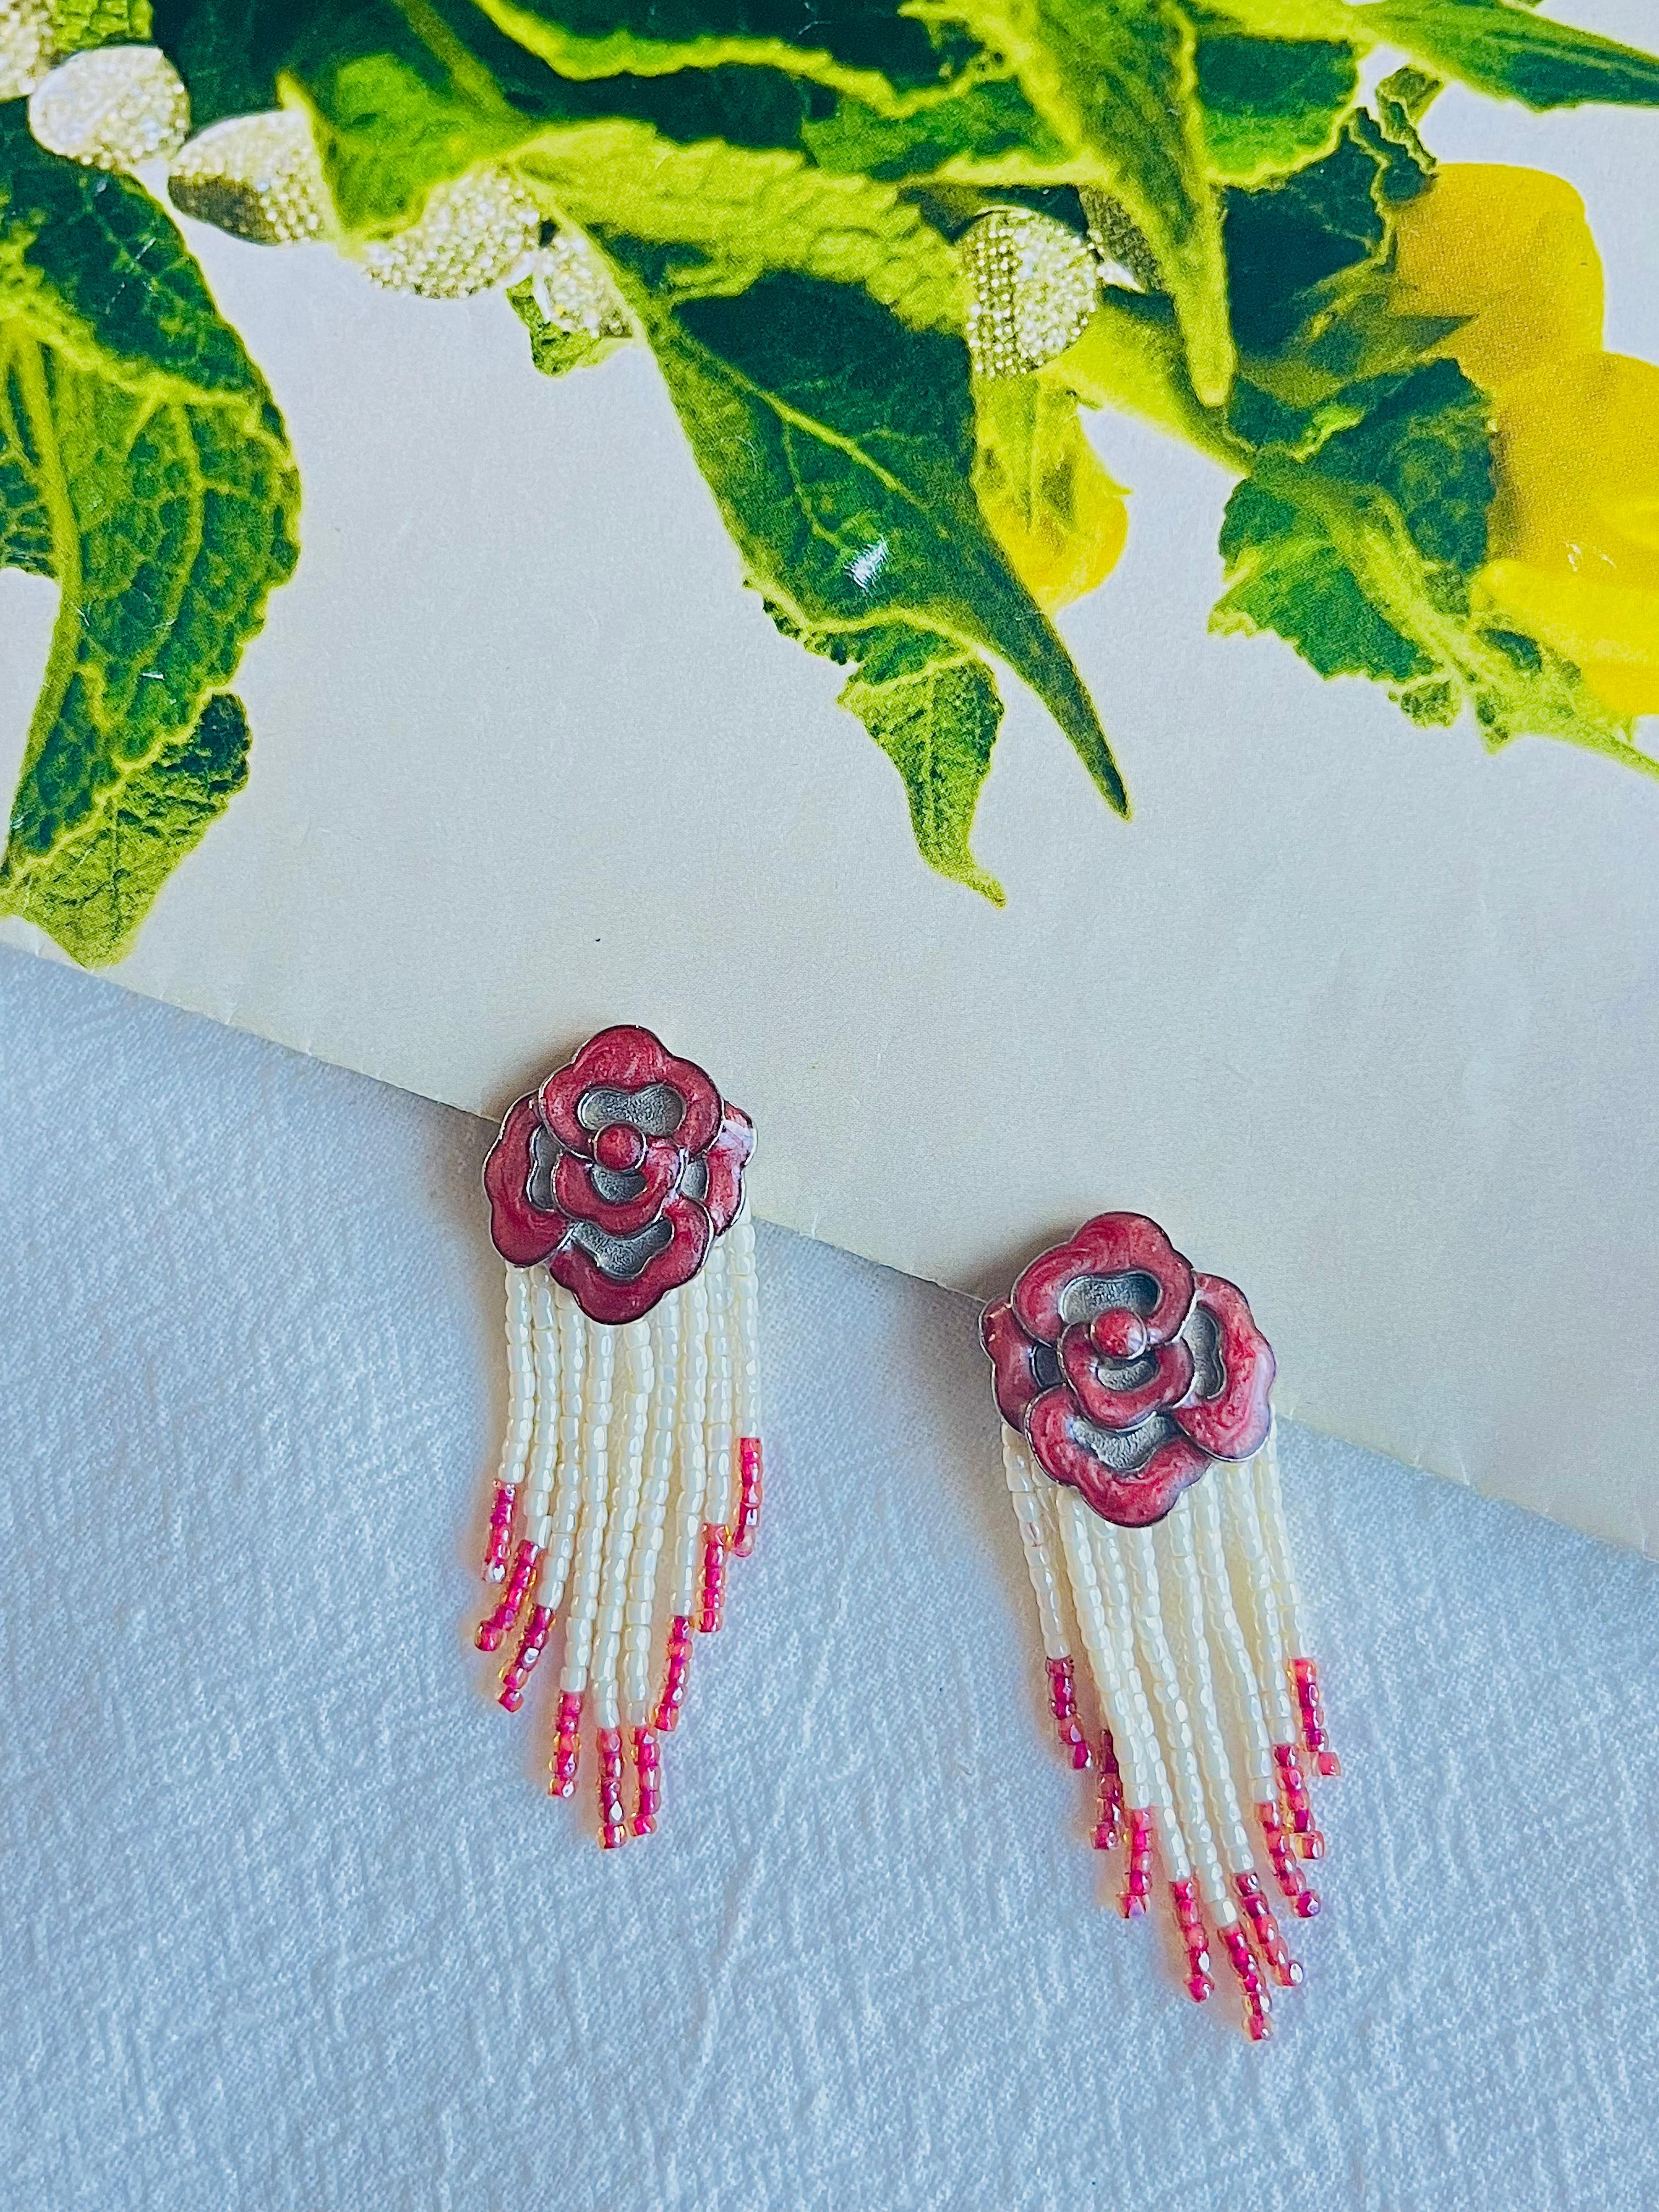 CHRISTIAN DIOR by John Galliano 1997 Burgundy Rose Micro Beads Tassel Earrings In Excellent Condition For Sale In Wokingham, England